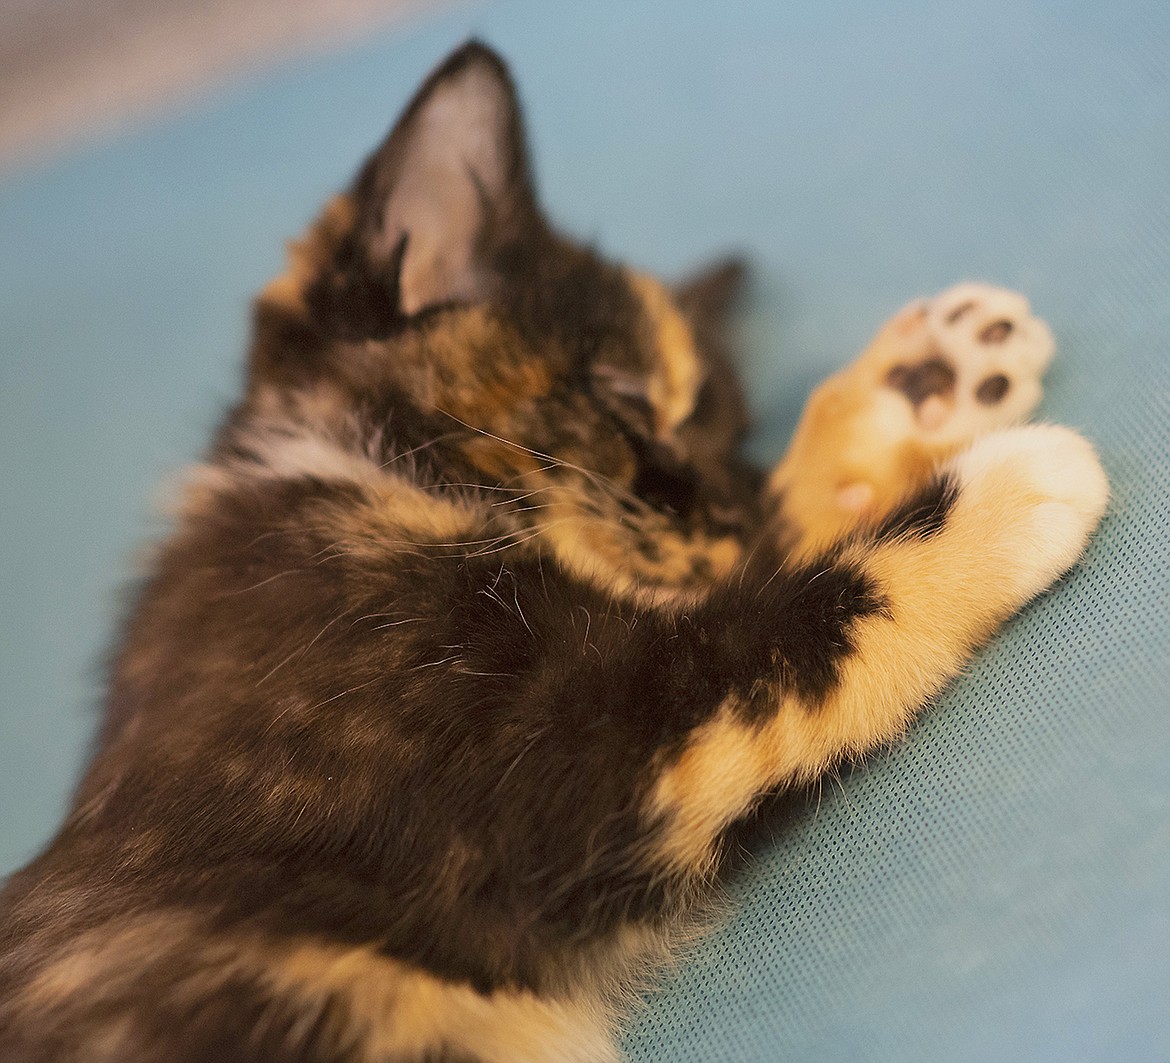 A kitten recovers after surgery at the Spay and Neuter Task Force during a cat clinic. (Julie Engler/Whitefish Pilot)